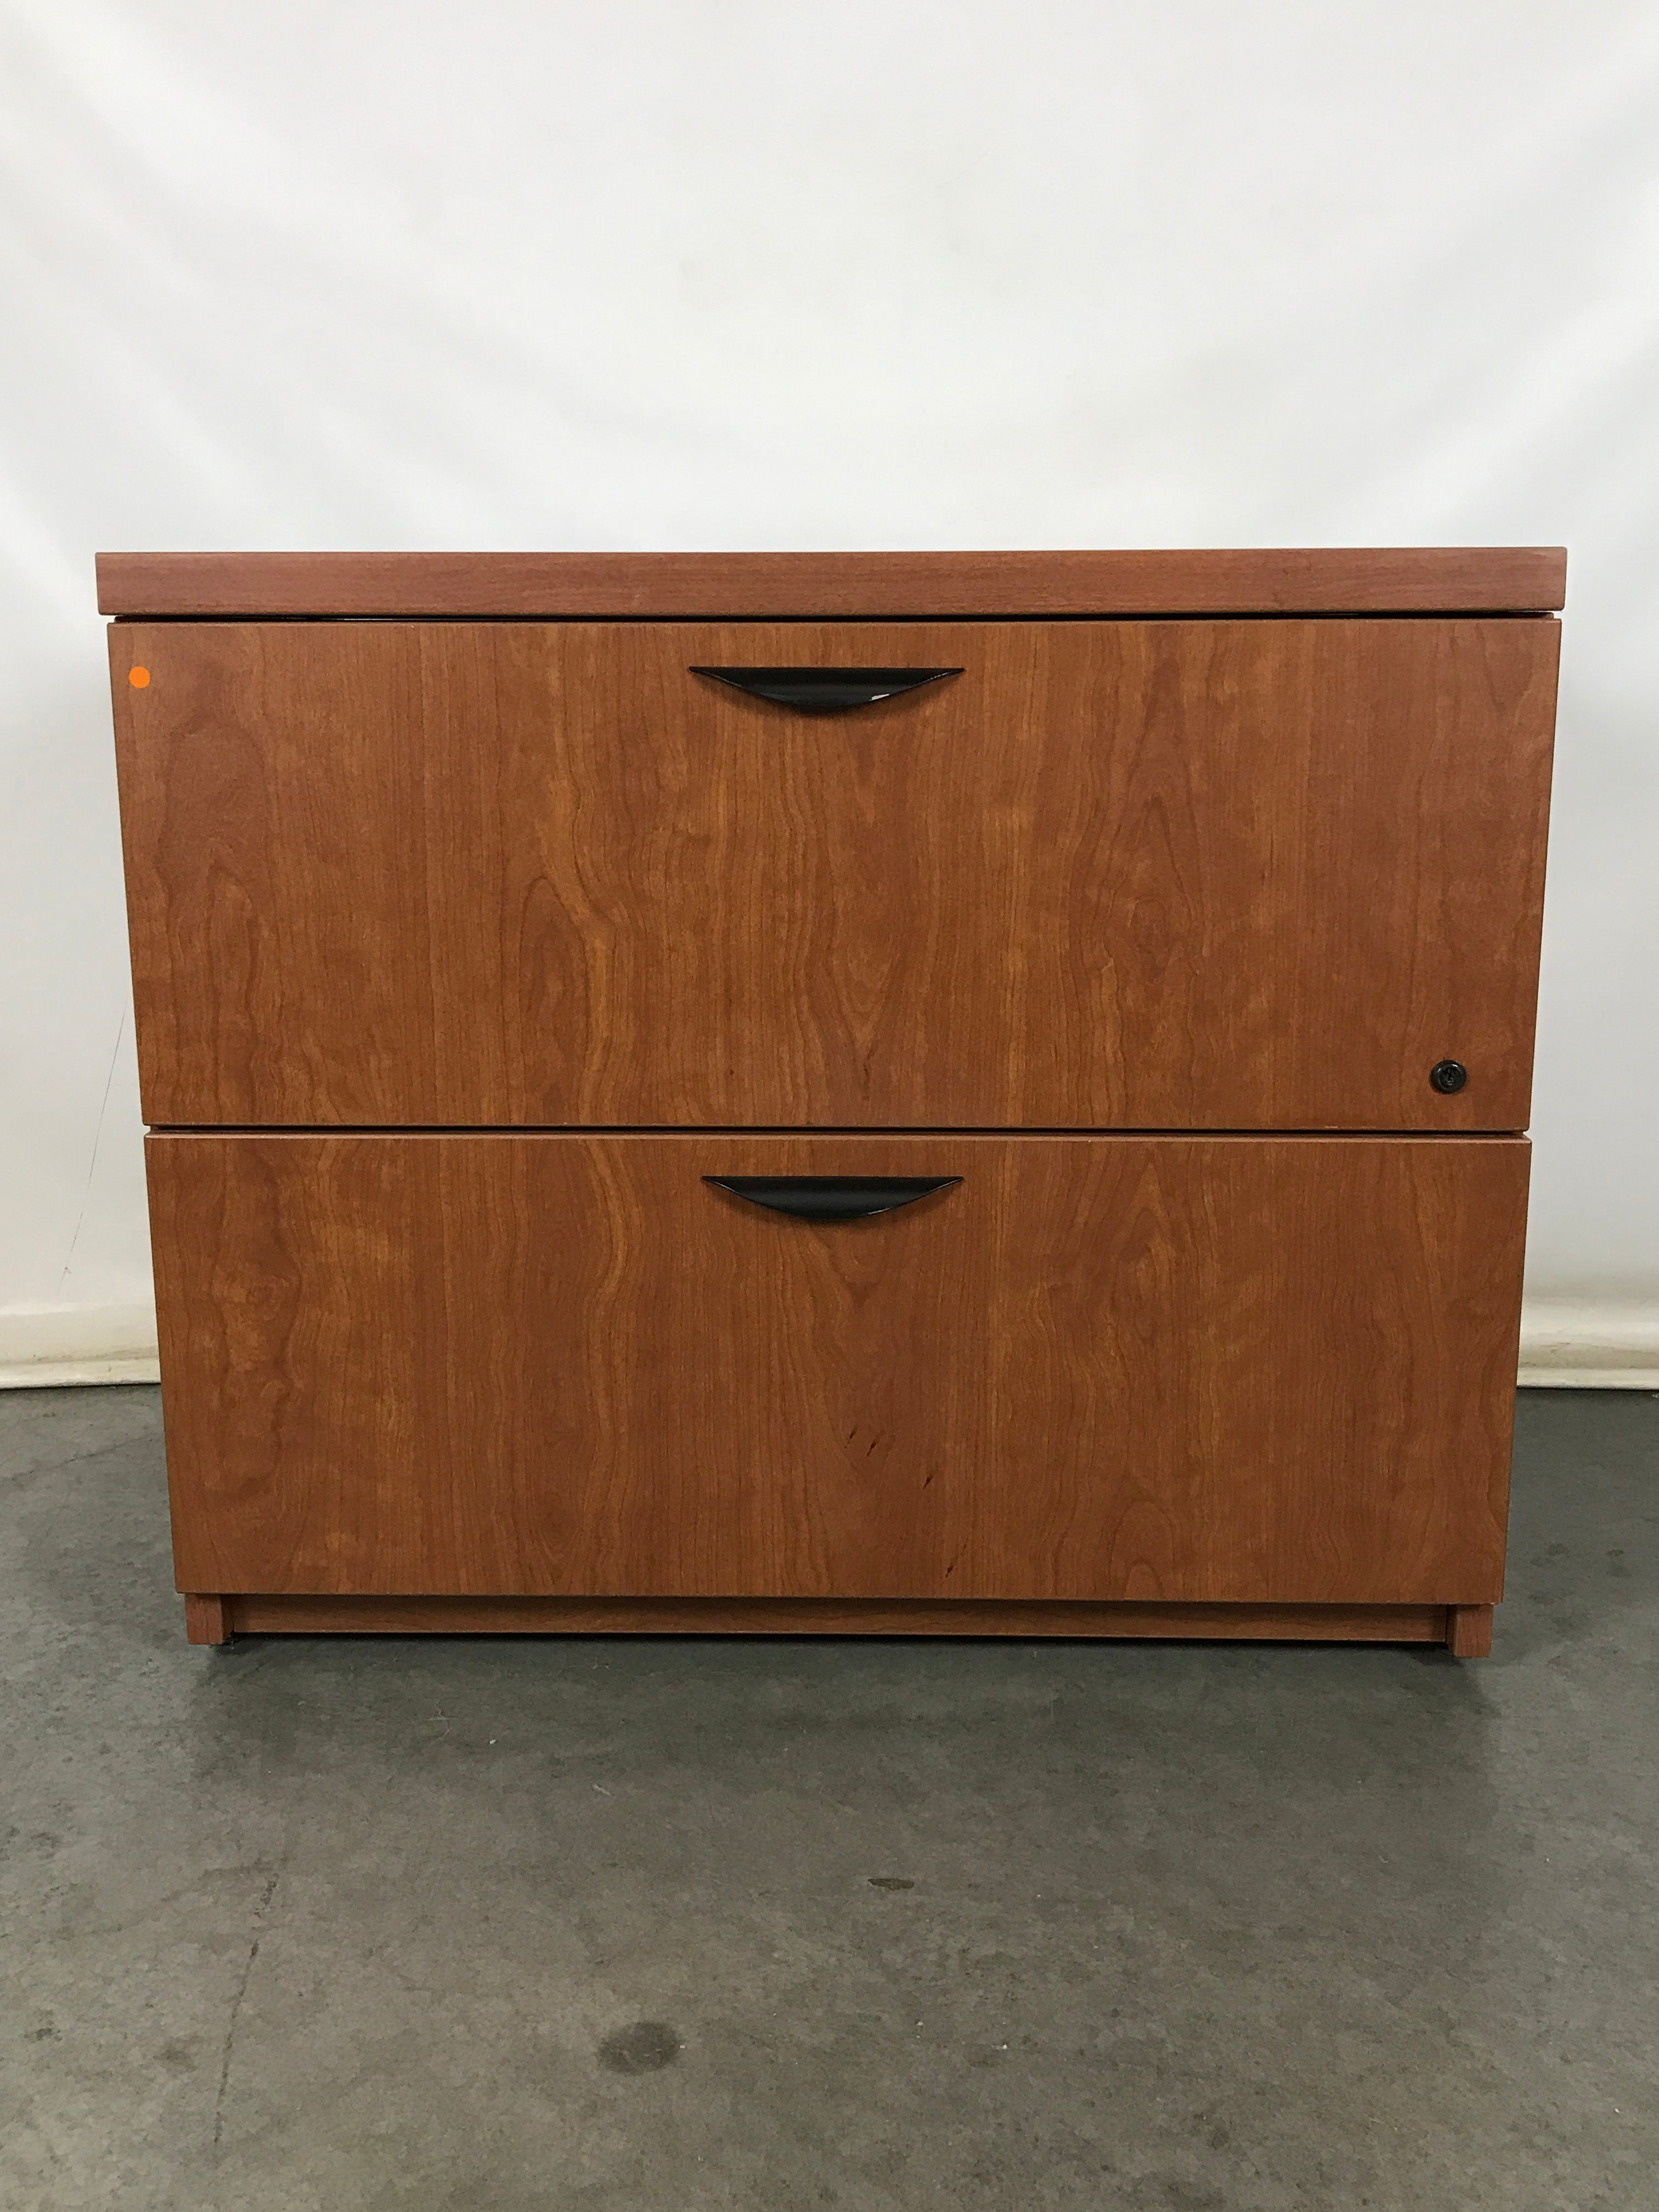 2 Drawer Wooden Lateral File Cabinet